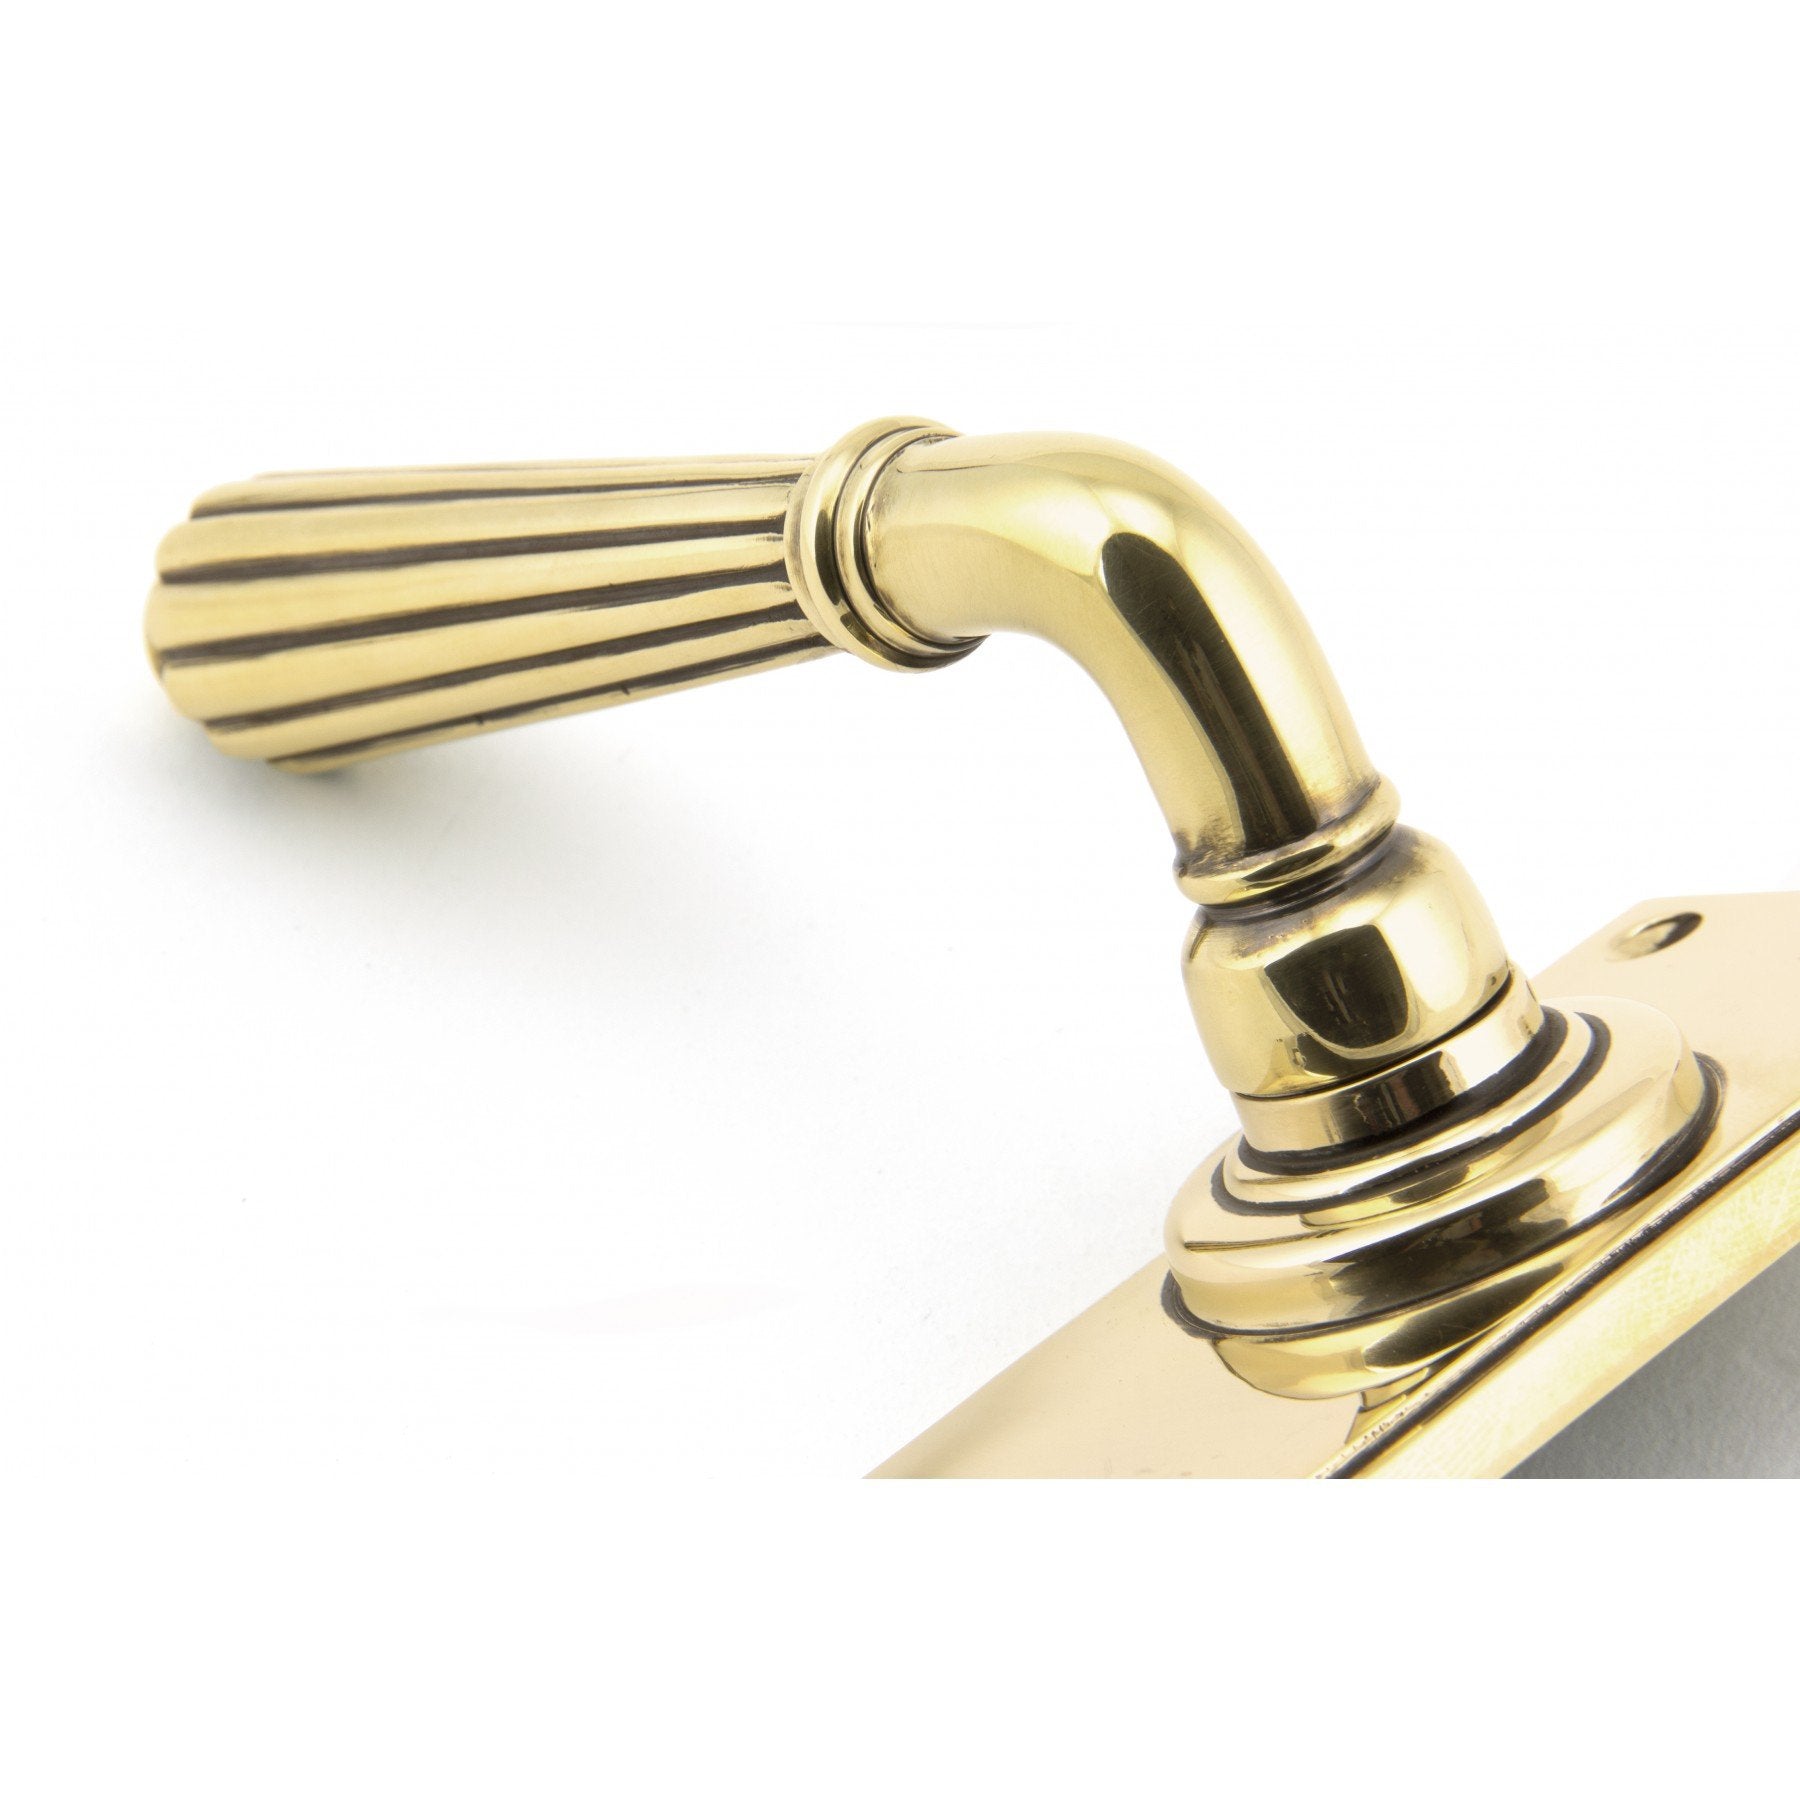 From the Anvil Aged Brass Hinton Lever Latch Set